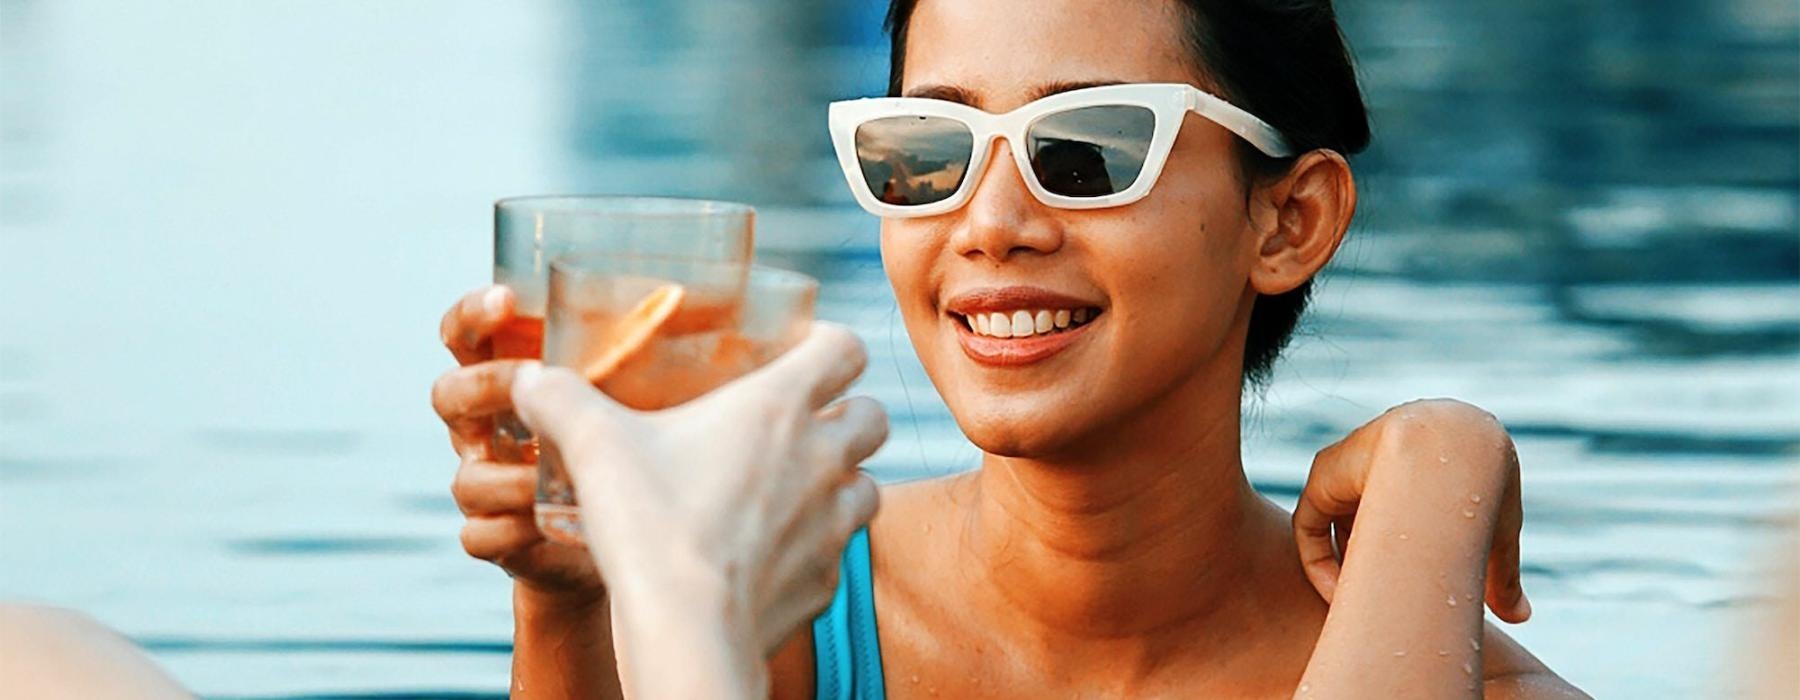 a woman in a pool holding a drink and a glass